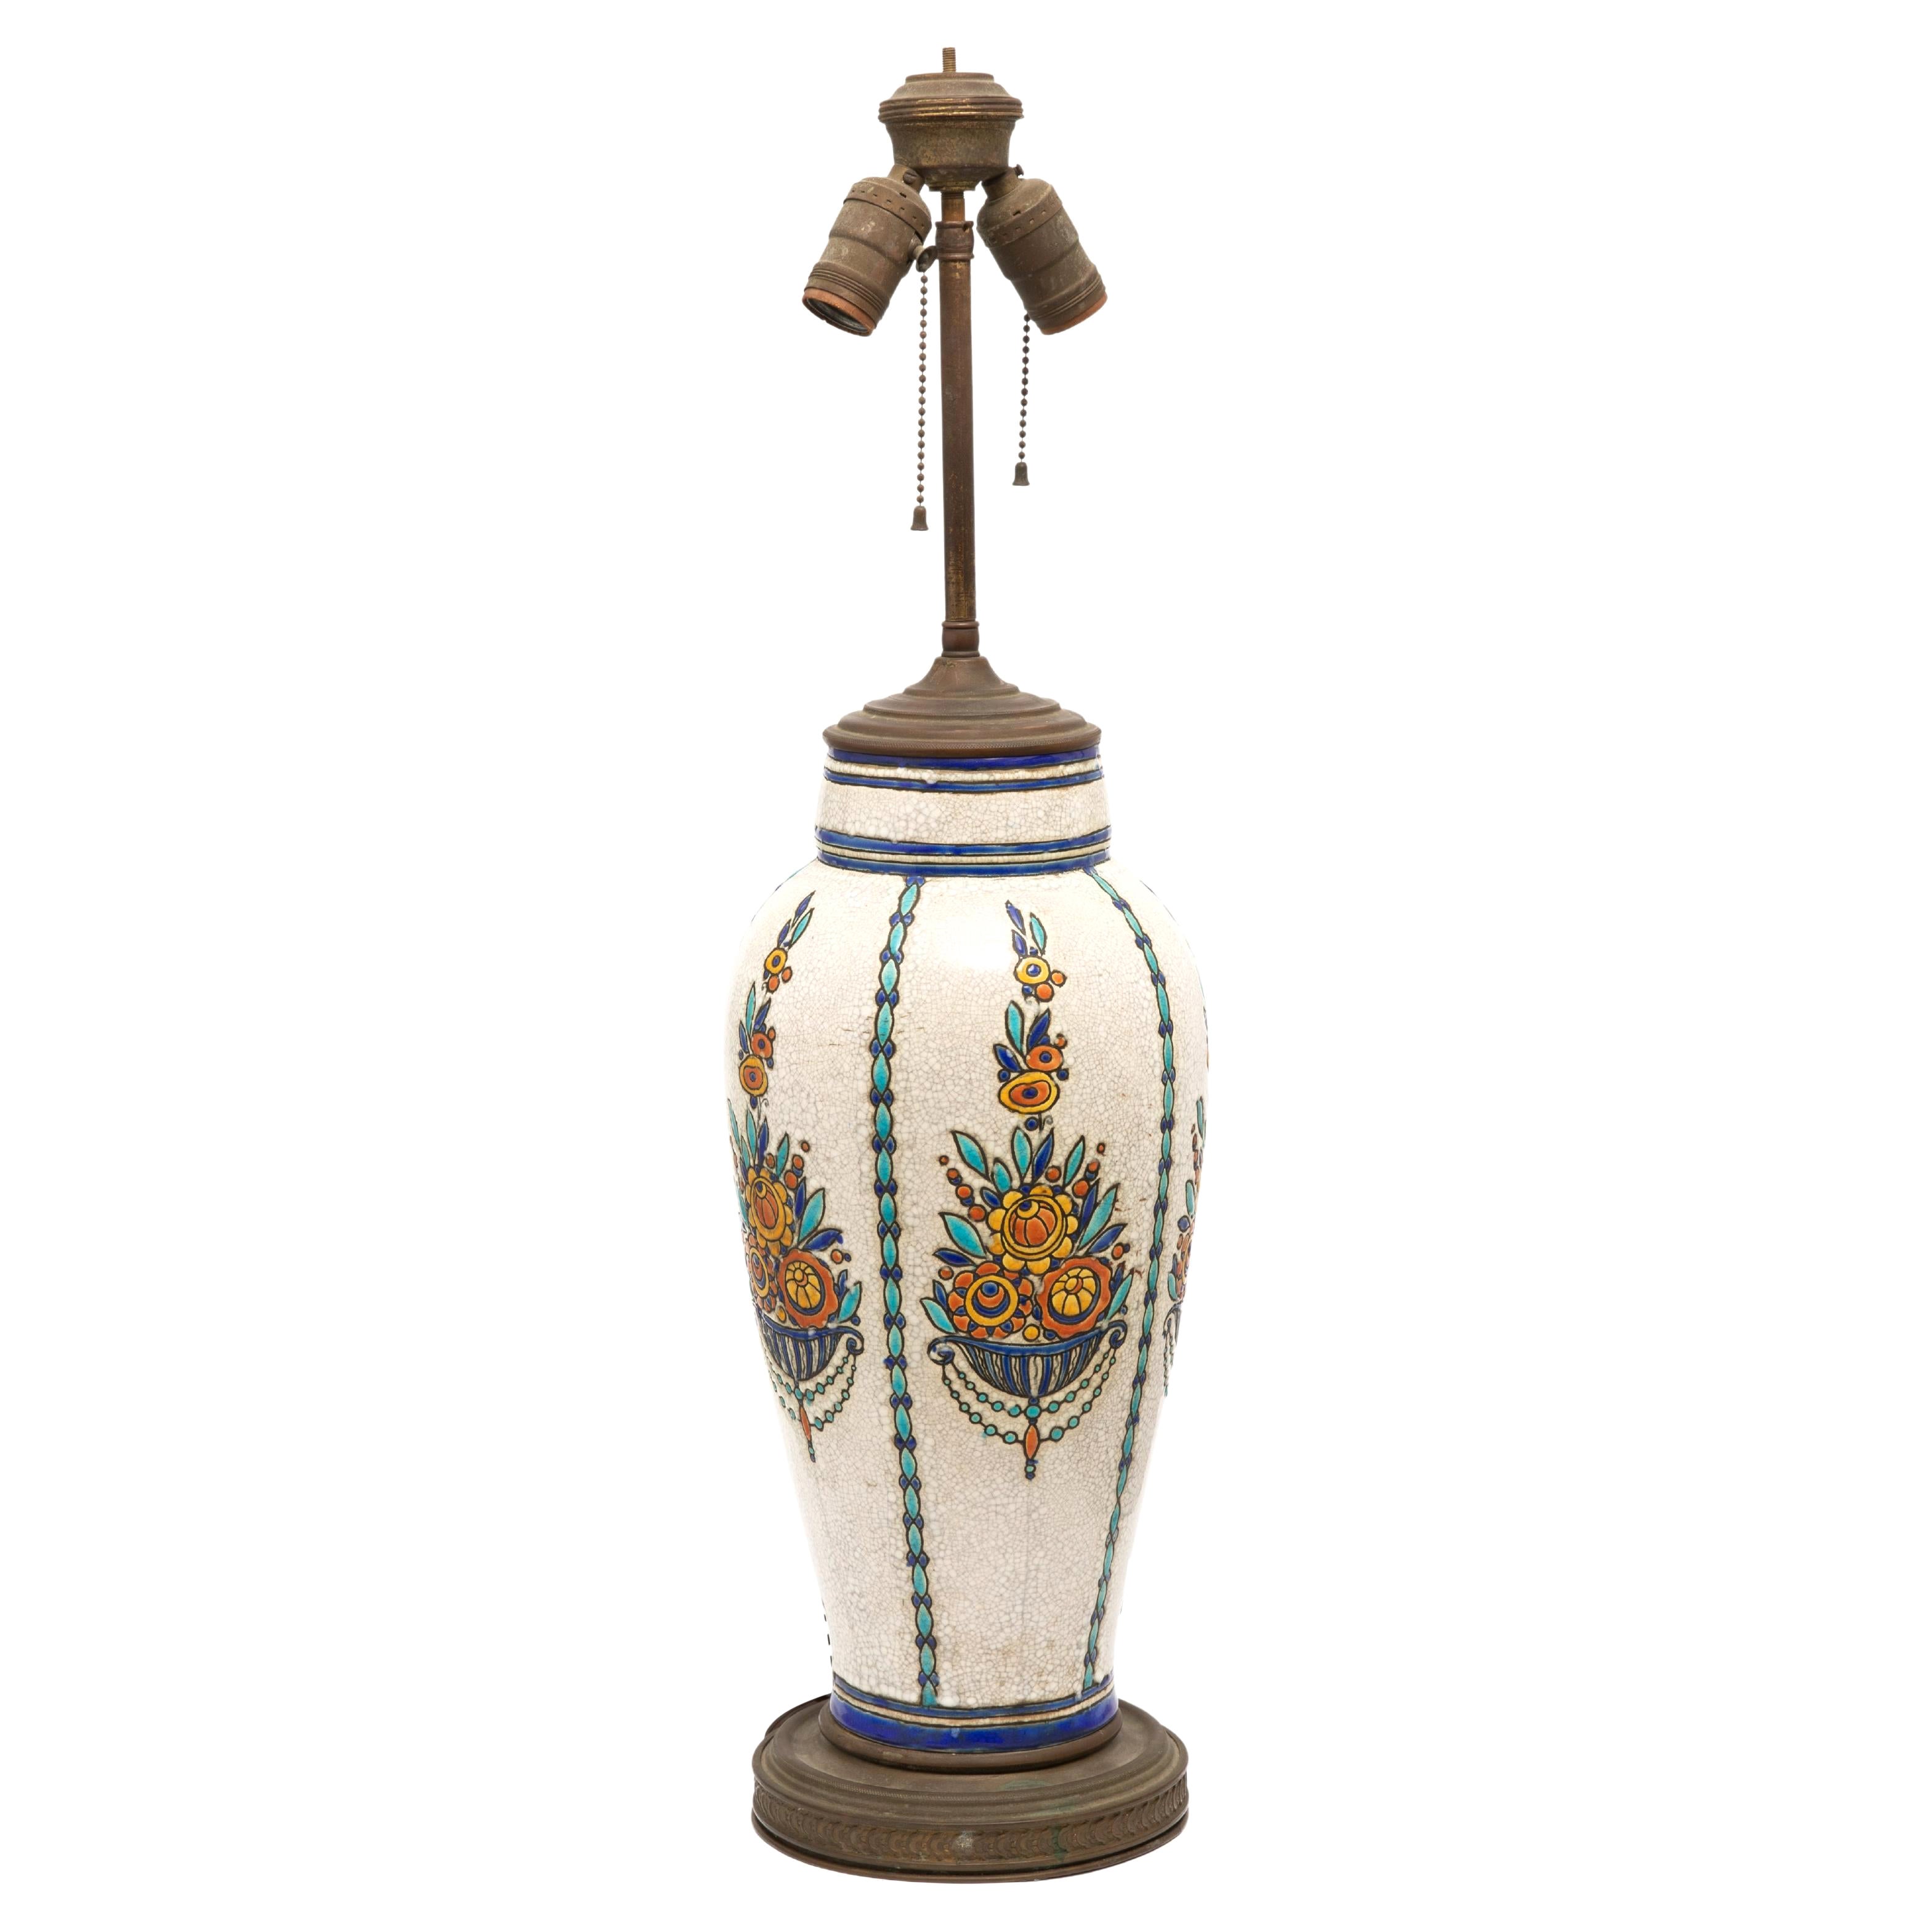 Charles Catteau's Boch Freres for Keramis enameled Ceramic Tall Table Lamp